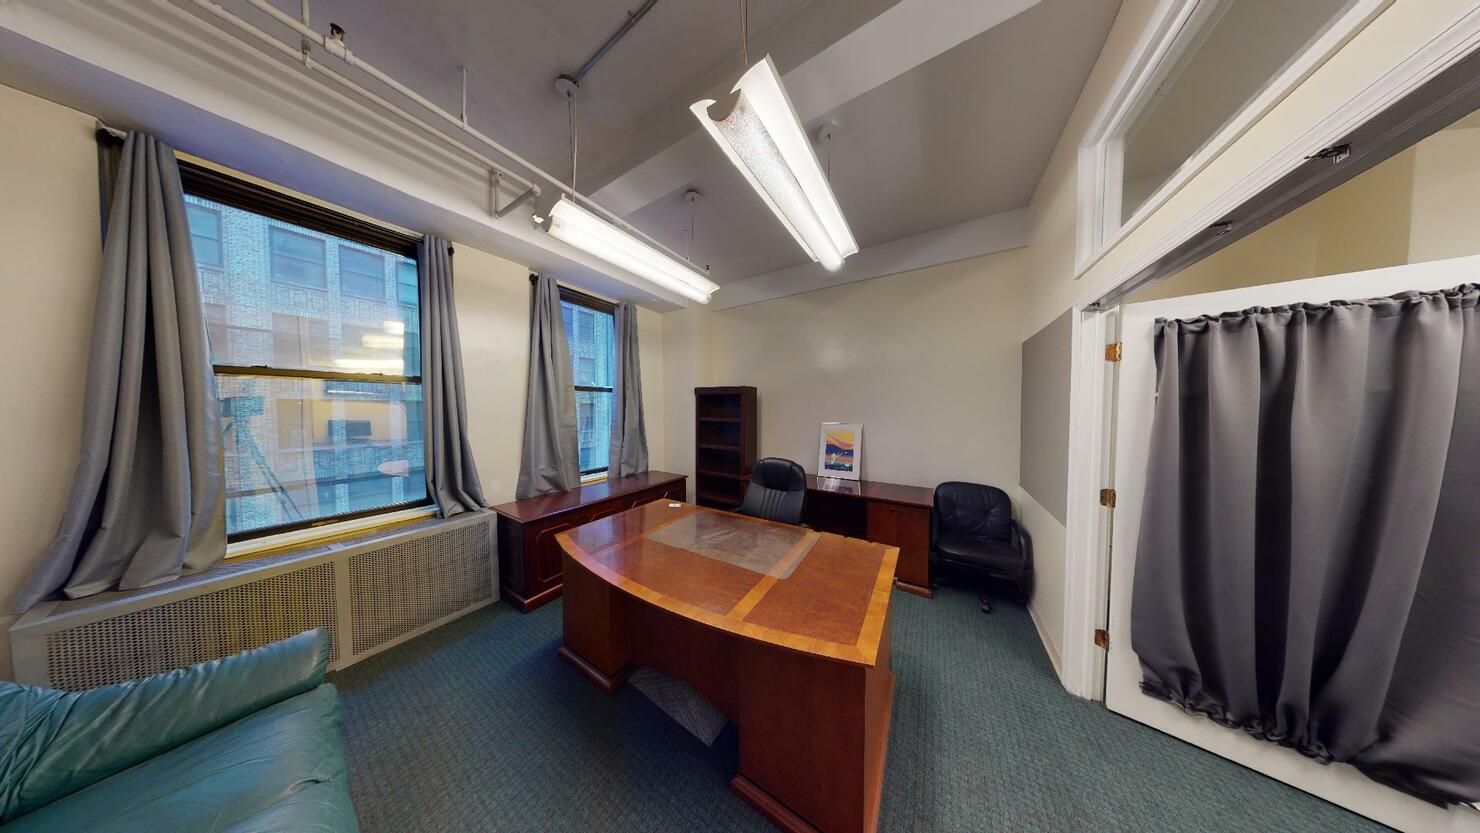 247 West 35th Street Office Space - Private Office with Large Windows